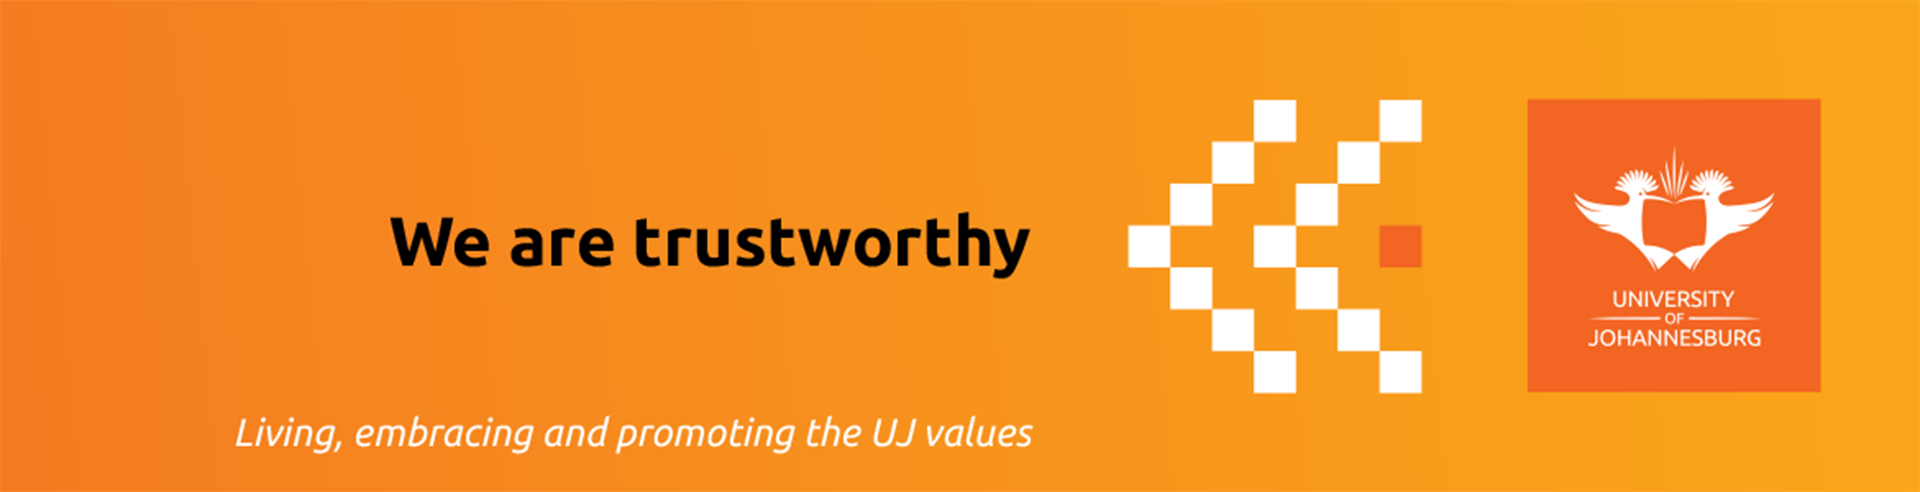 Uj Values Expressions Posters 2020 Ulink 1170x300mm 33